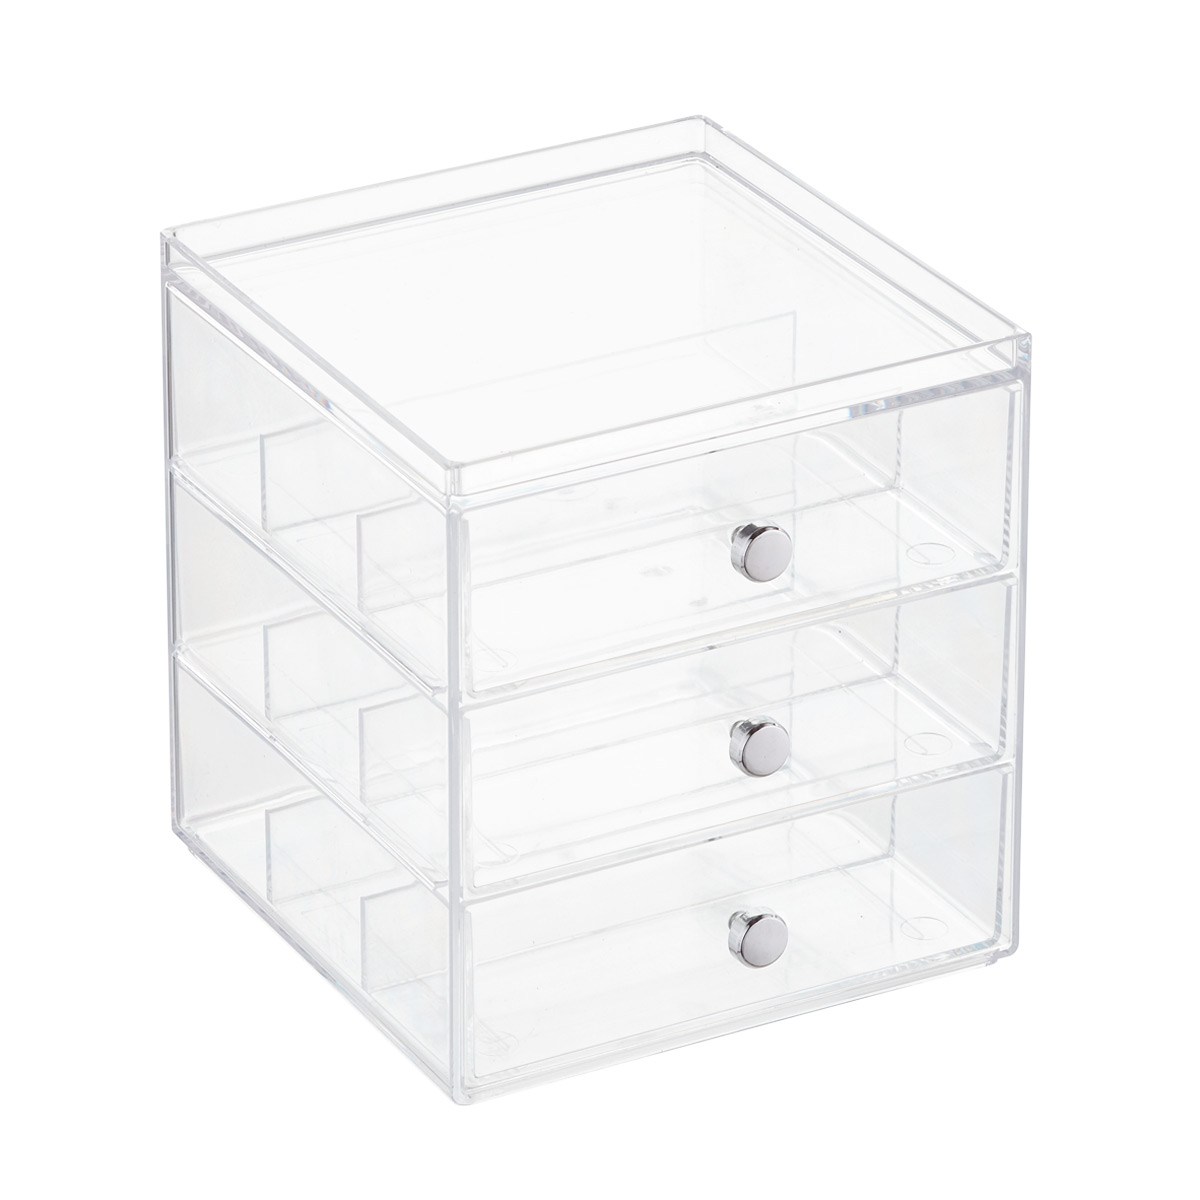 iDesign Clarity Stackable Makeup System | The Container Store